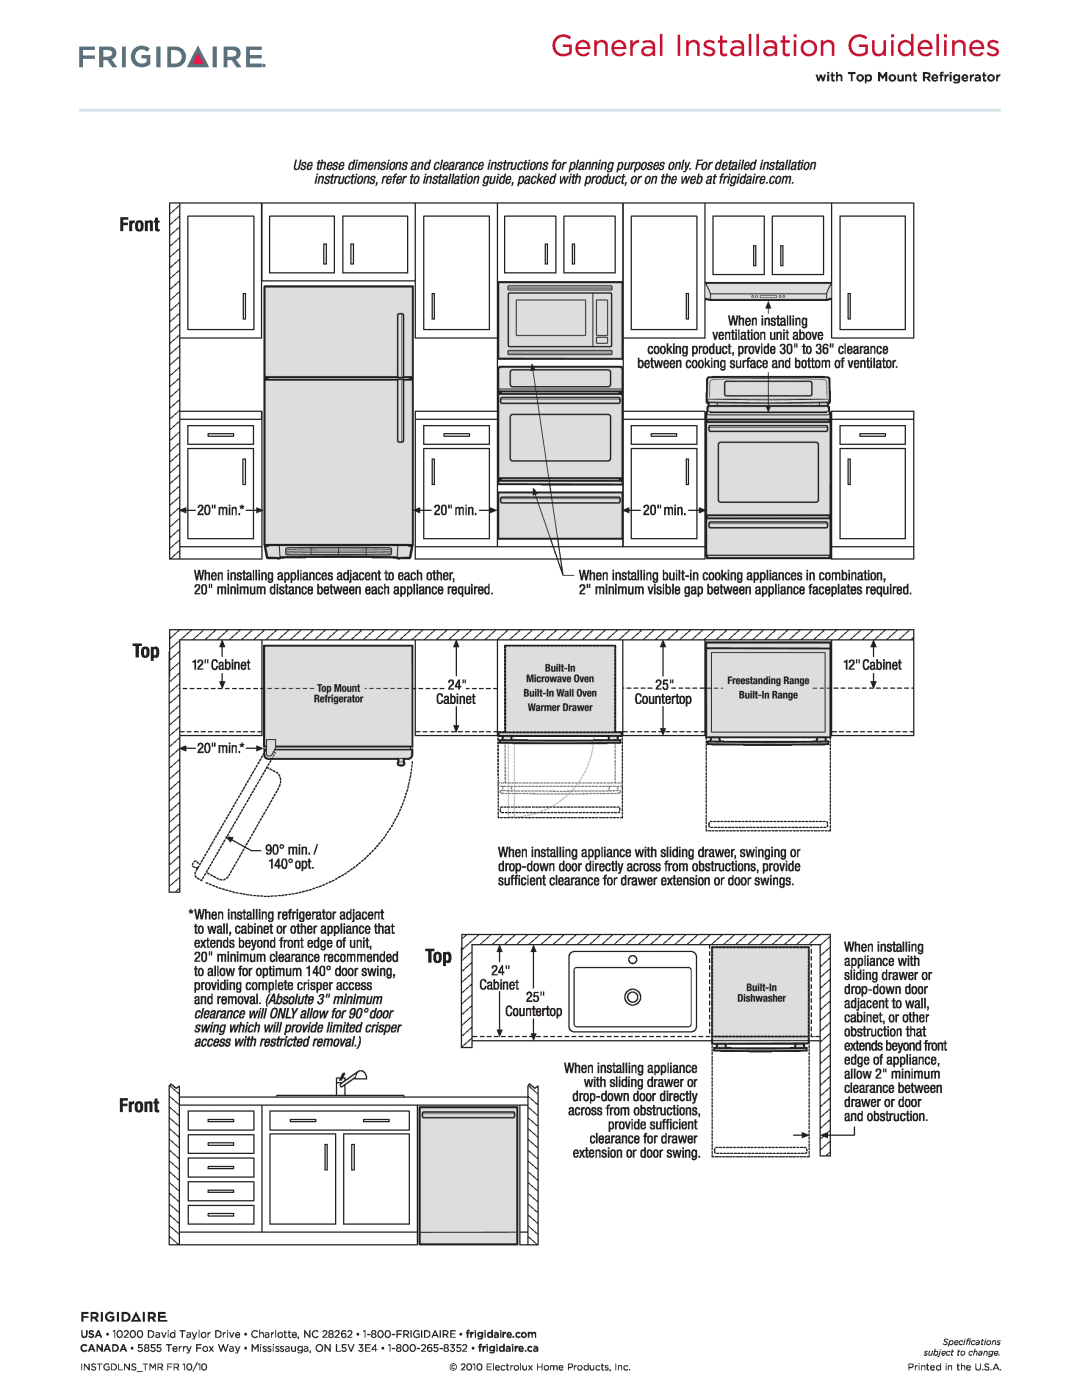 Frigidaire FPMC2785K F dimensions General Installation Guidelines, Top Front, with Top Mount Refrigerator 